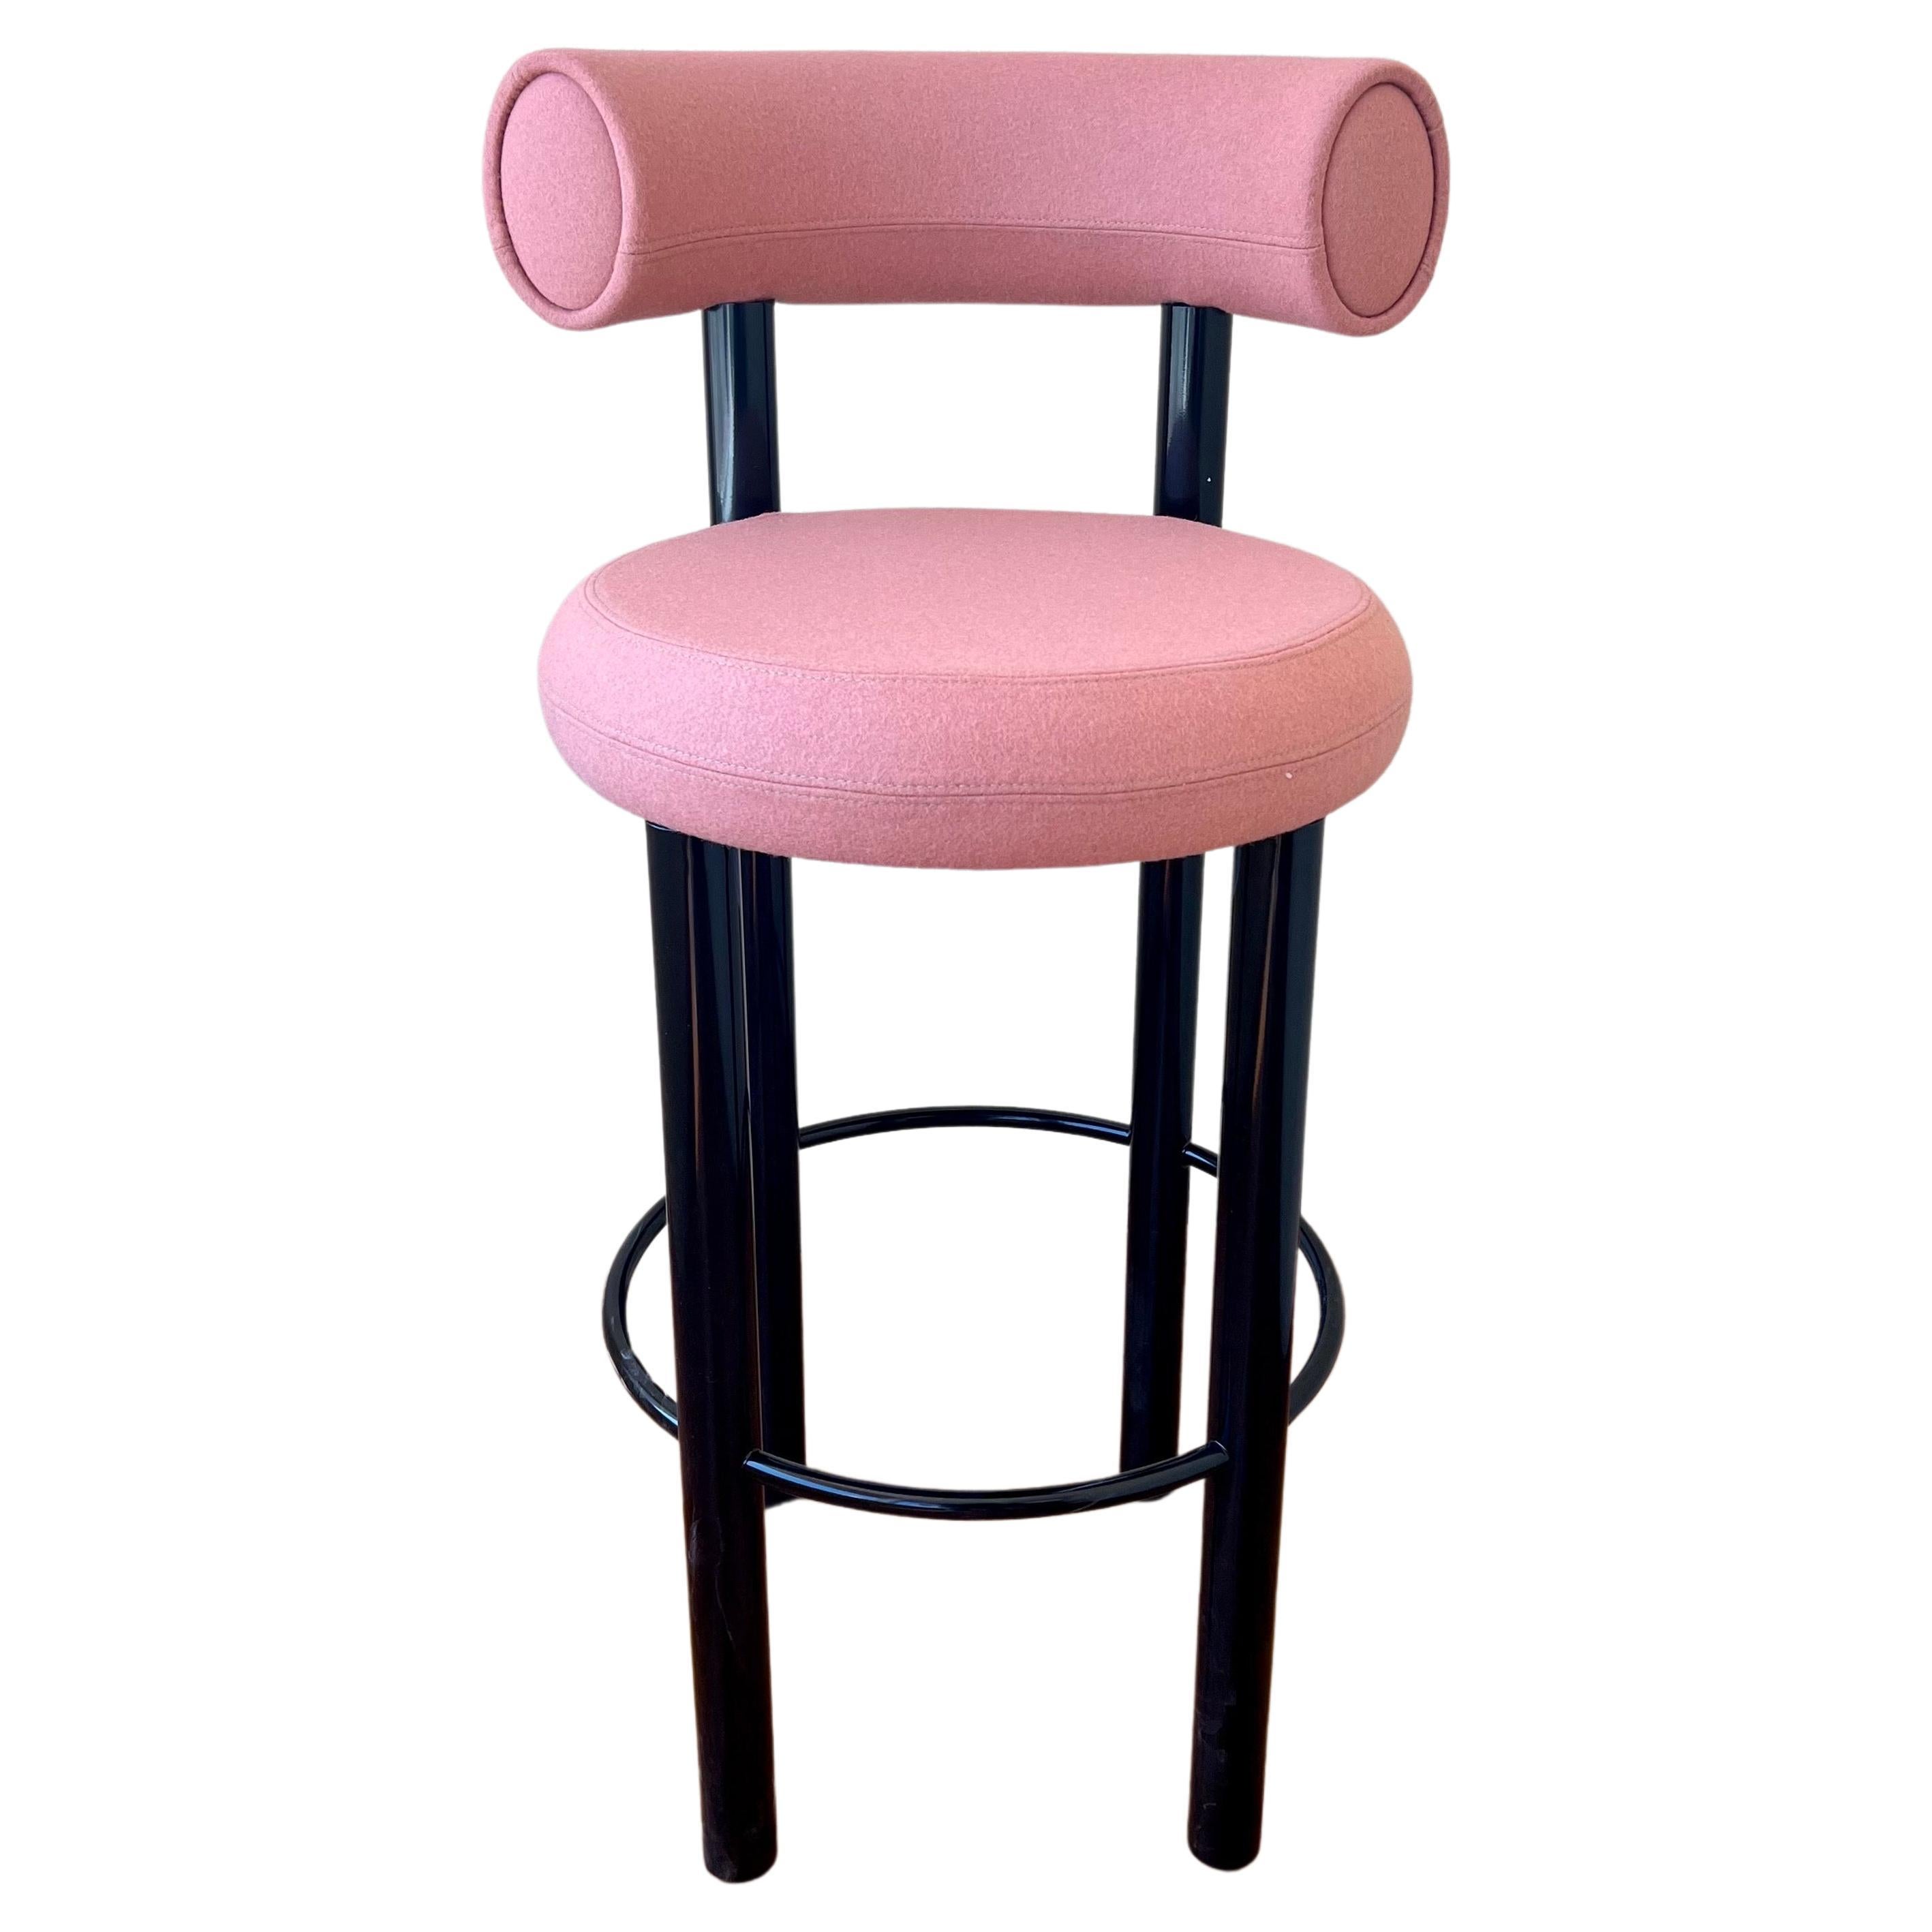 Great set of 3 Barstools these were custom made we have another set of 2 available, but we were not able to use these sets we had to wait 6 months for them our loss is your win. these are new metal frames in a black enameled finish with pink